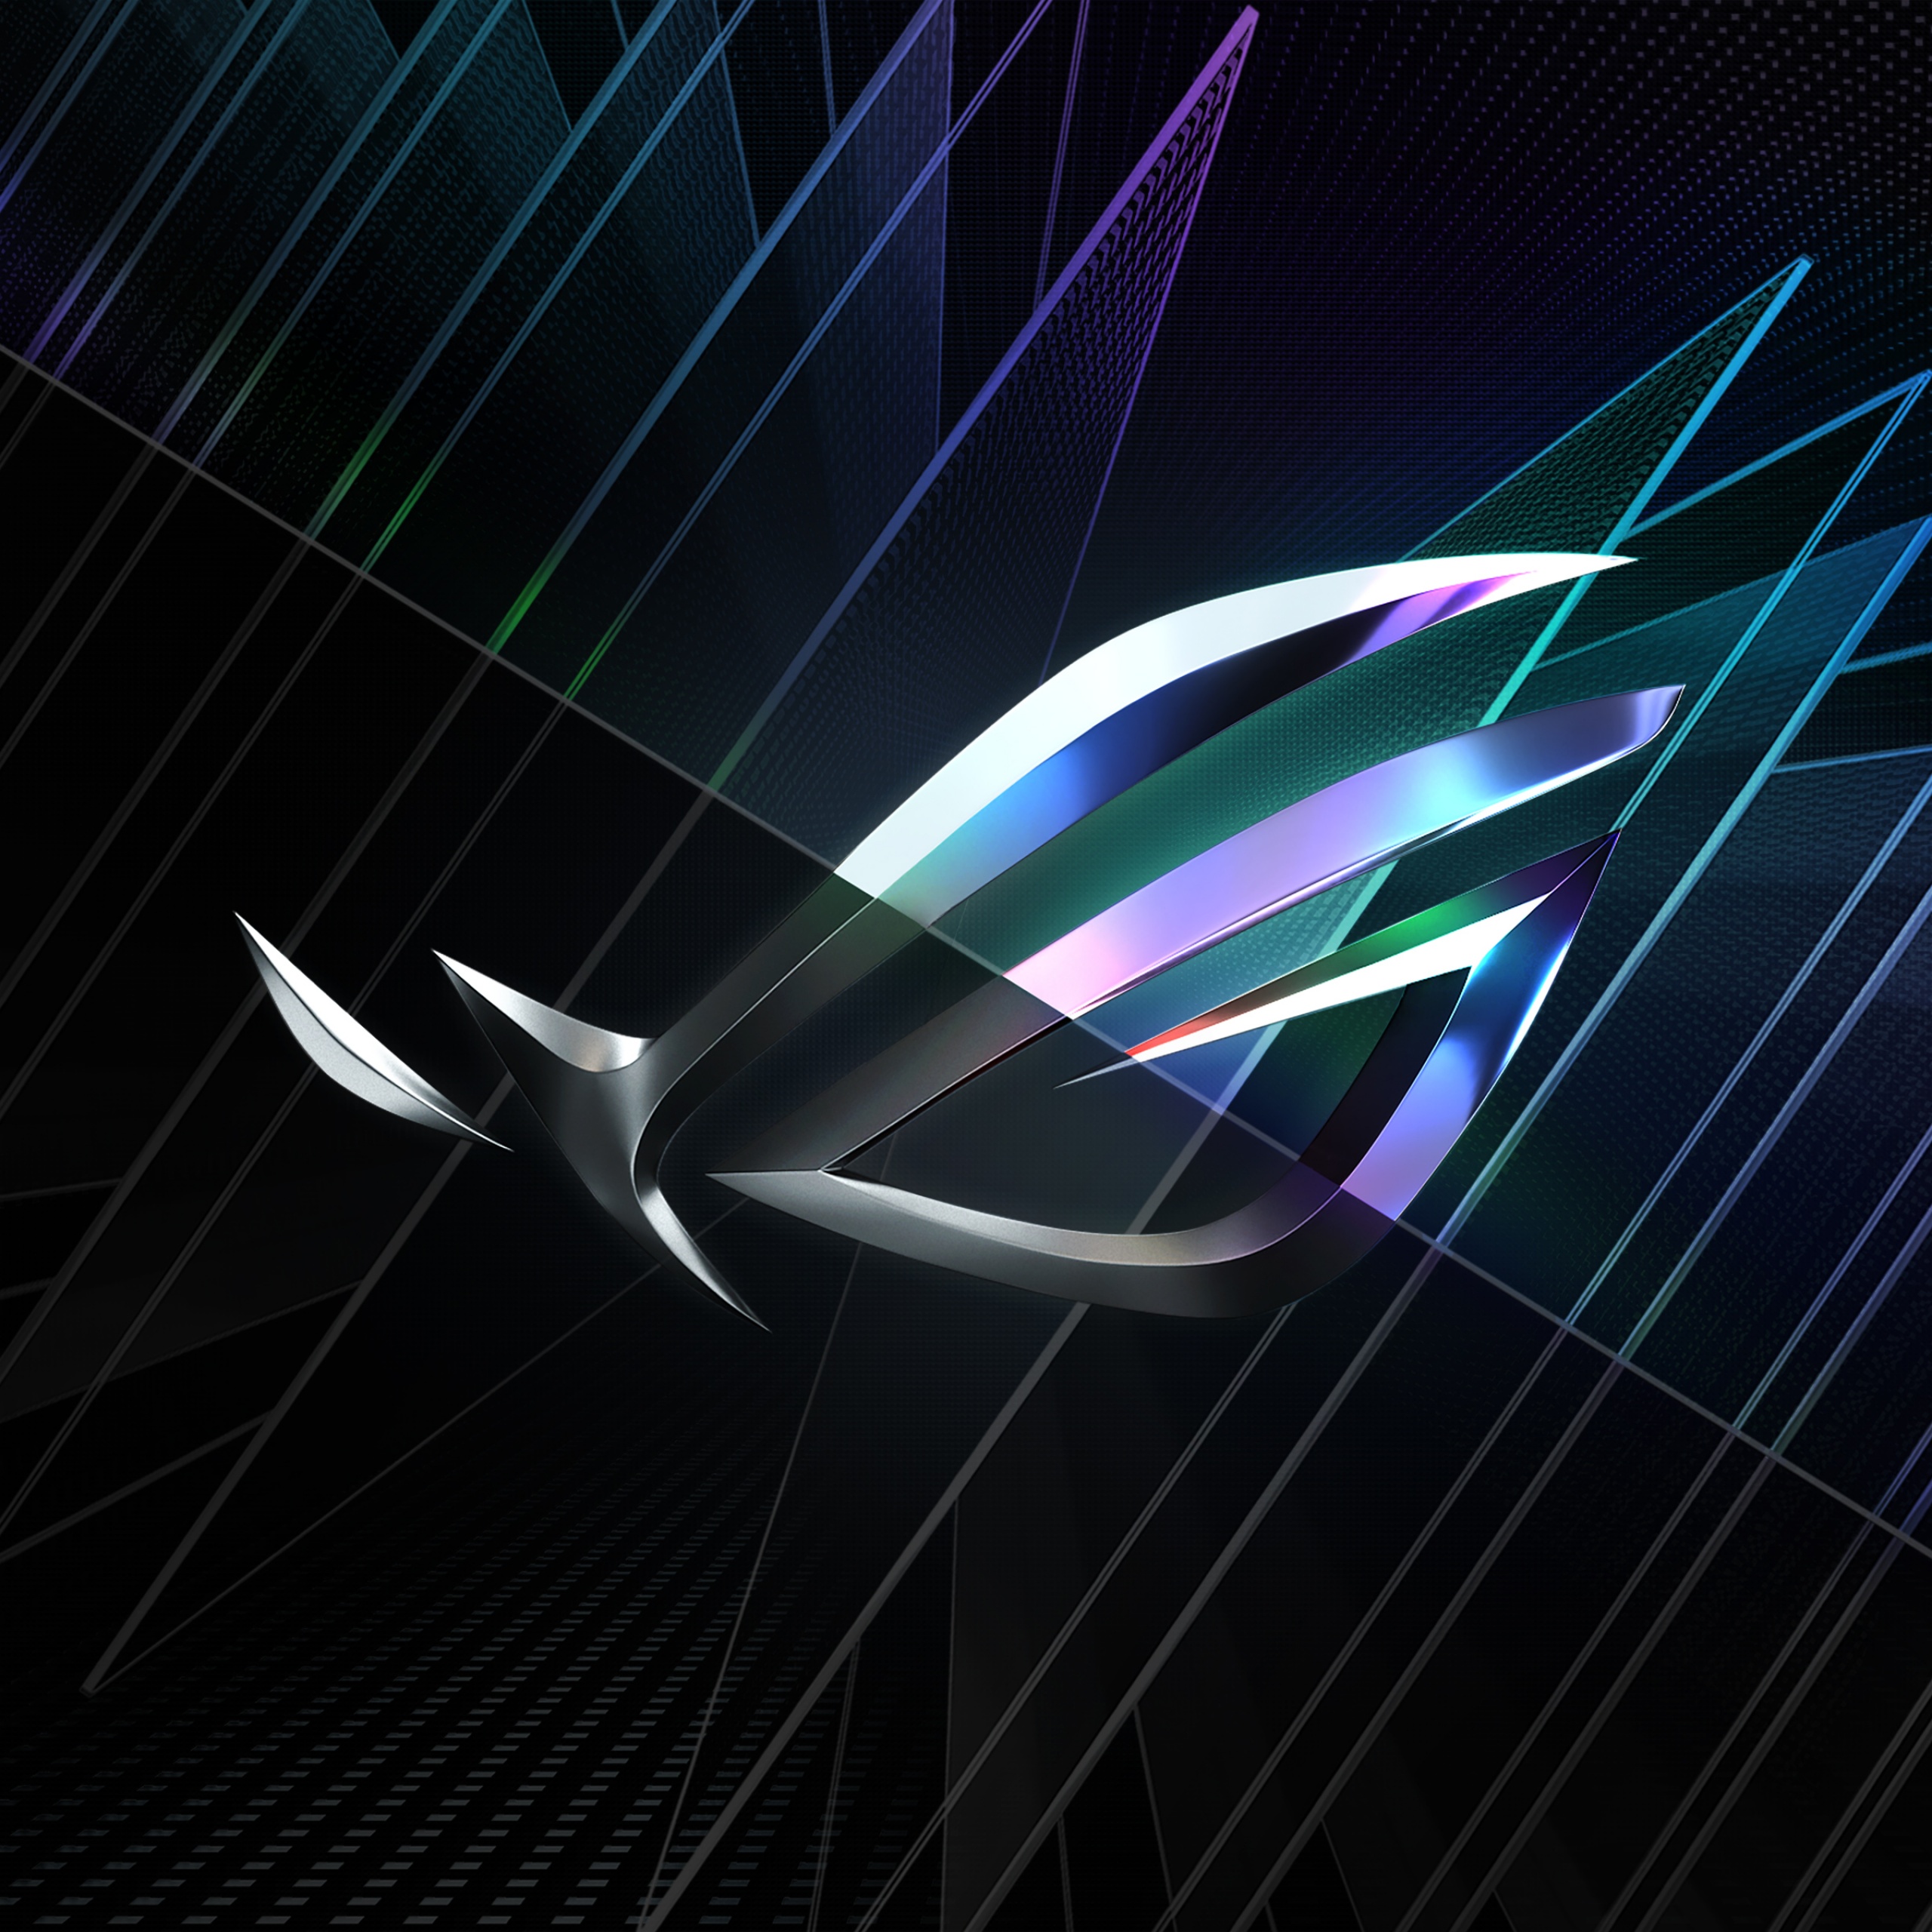 ASUS ROG Wallpaper 4K, Abstract background